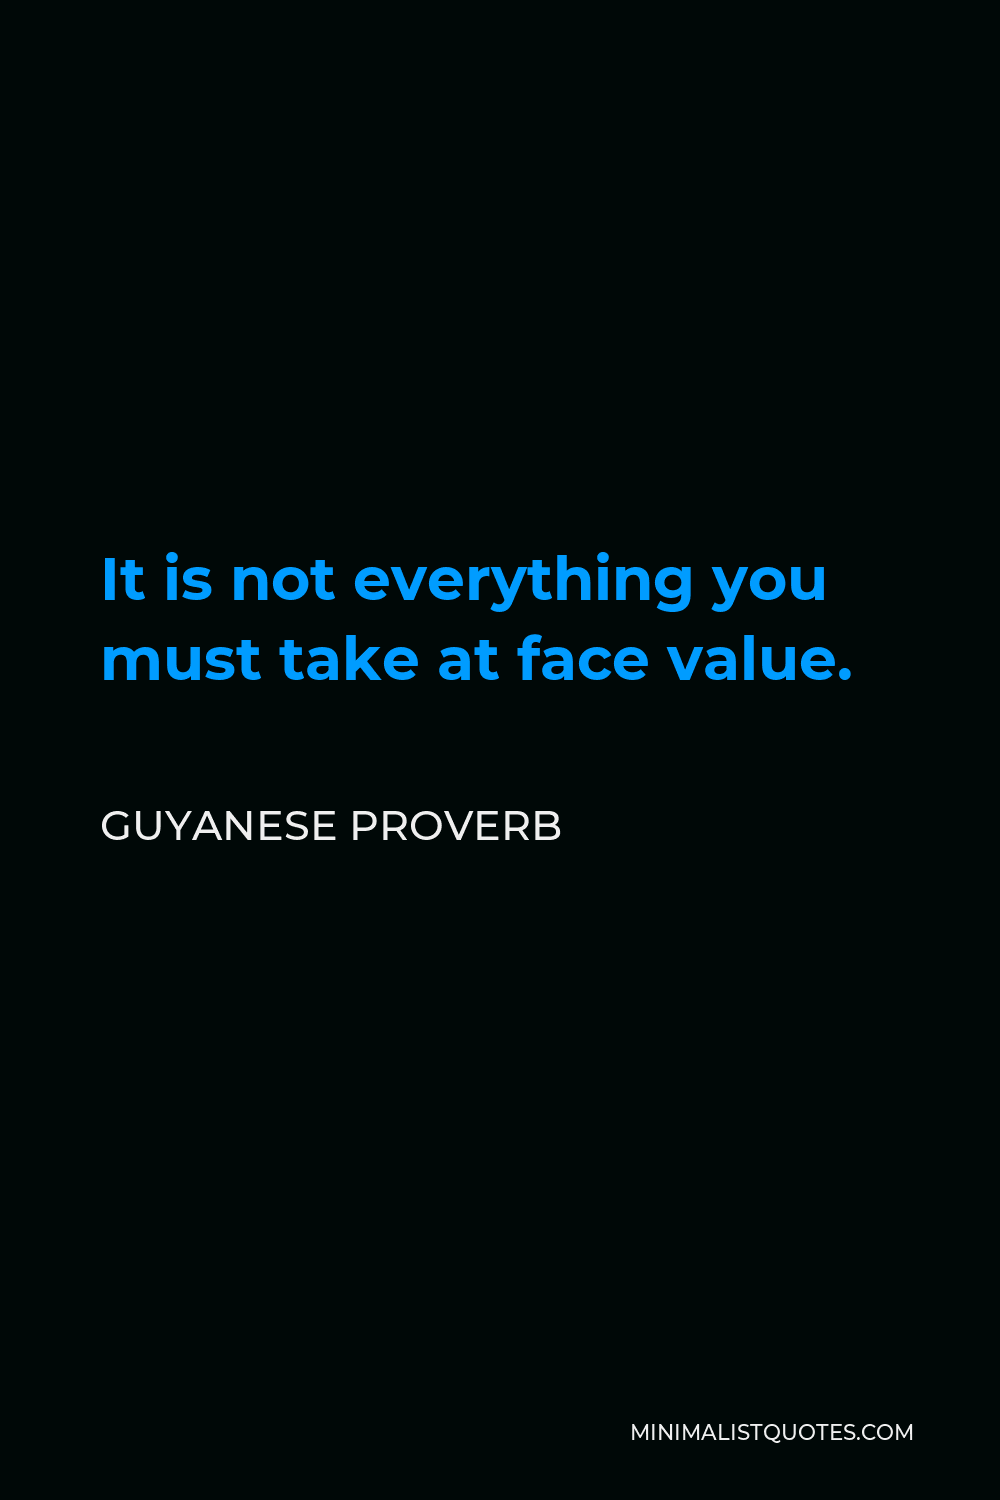 Guyanese Proverb Quote - It is not everything you must take at face value.